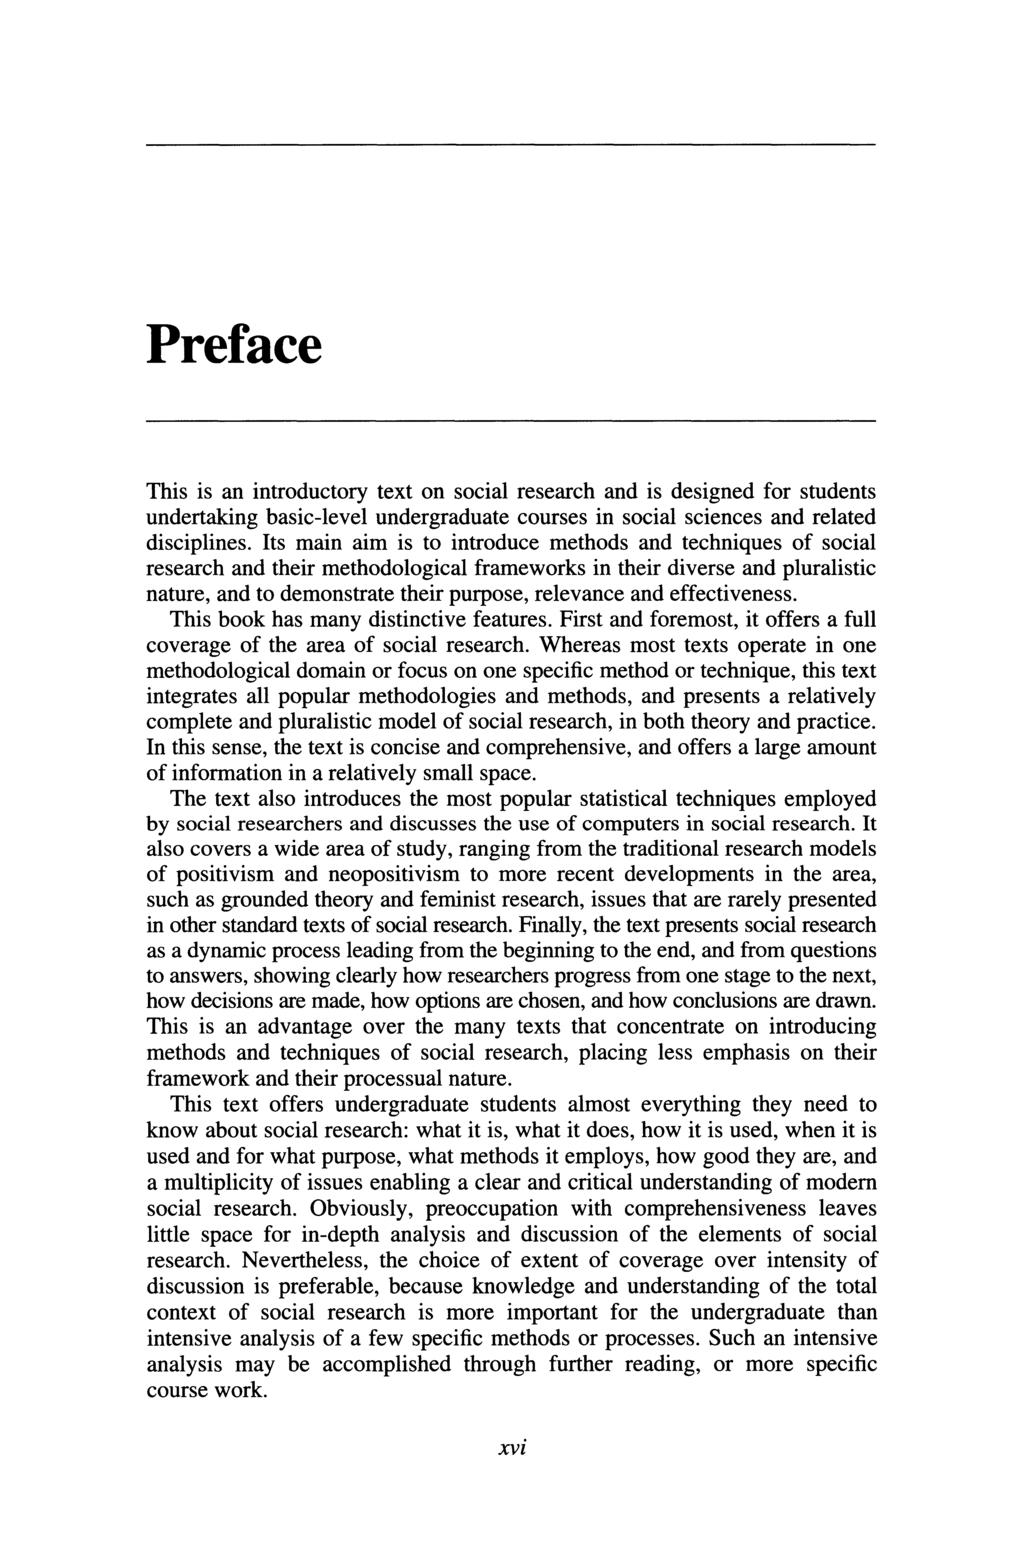 Preface This is an introductory text on social research and is designed for students undertaking basic-level undergraduate courses in social sciences and related disciplines.